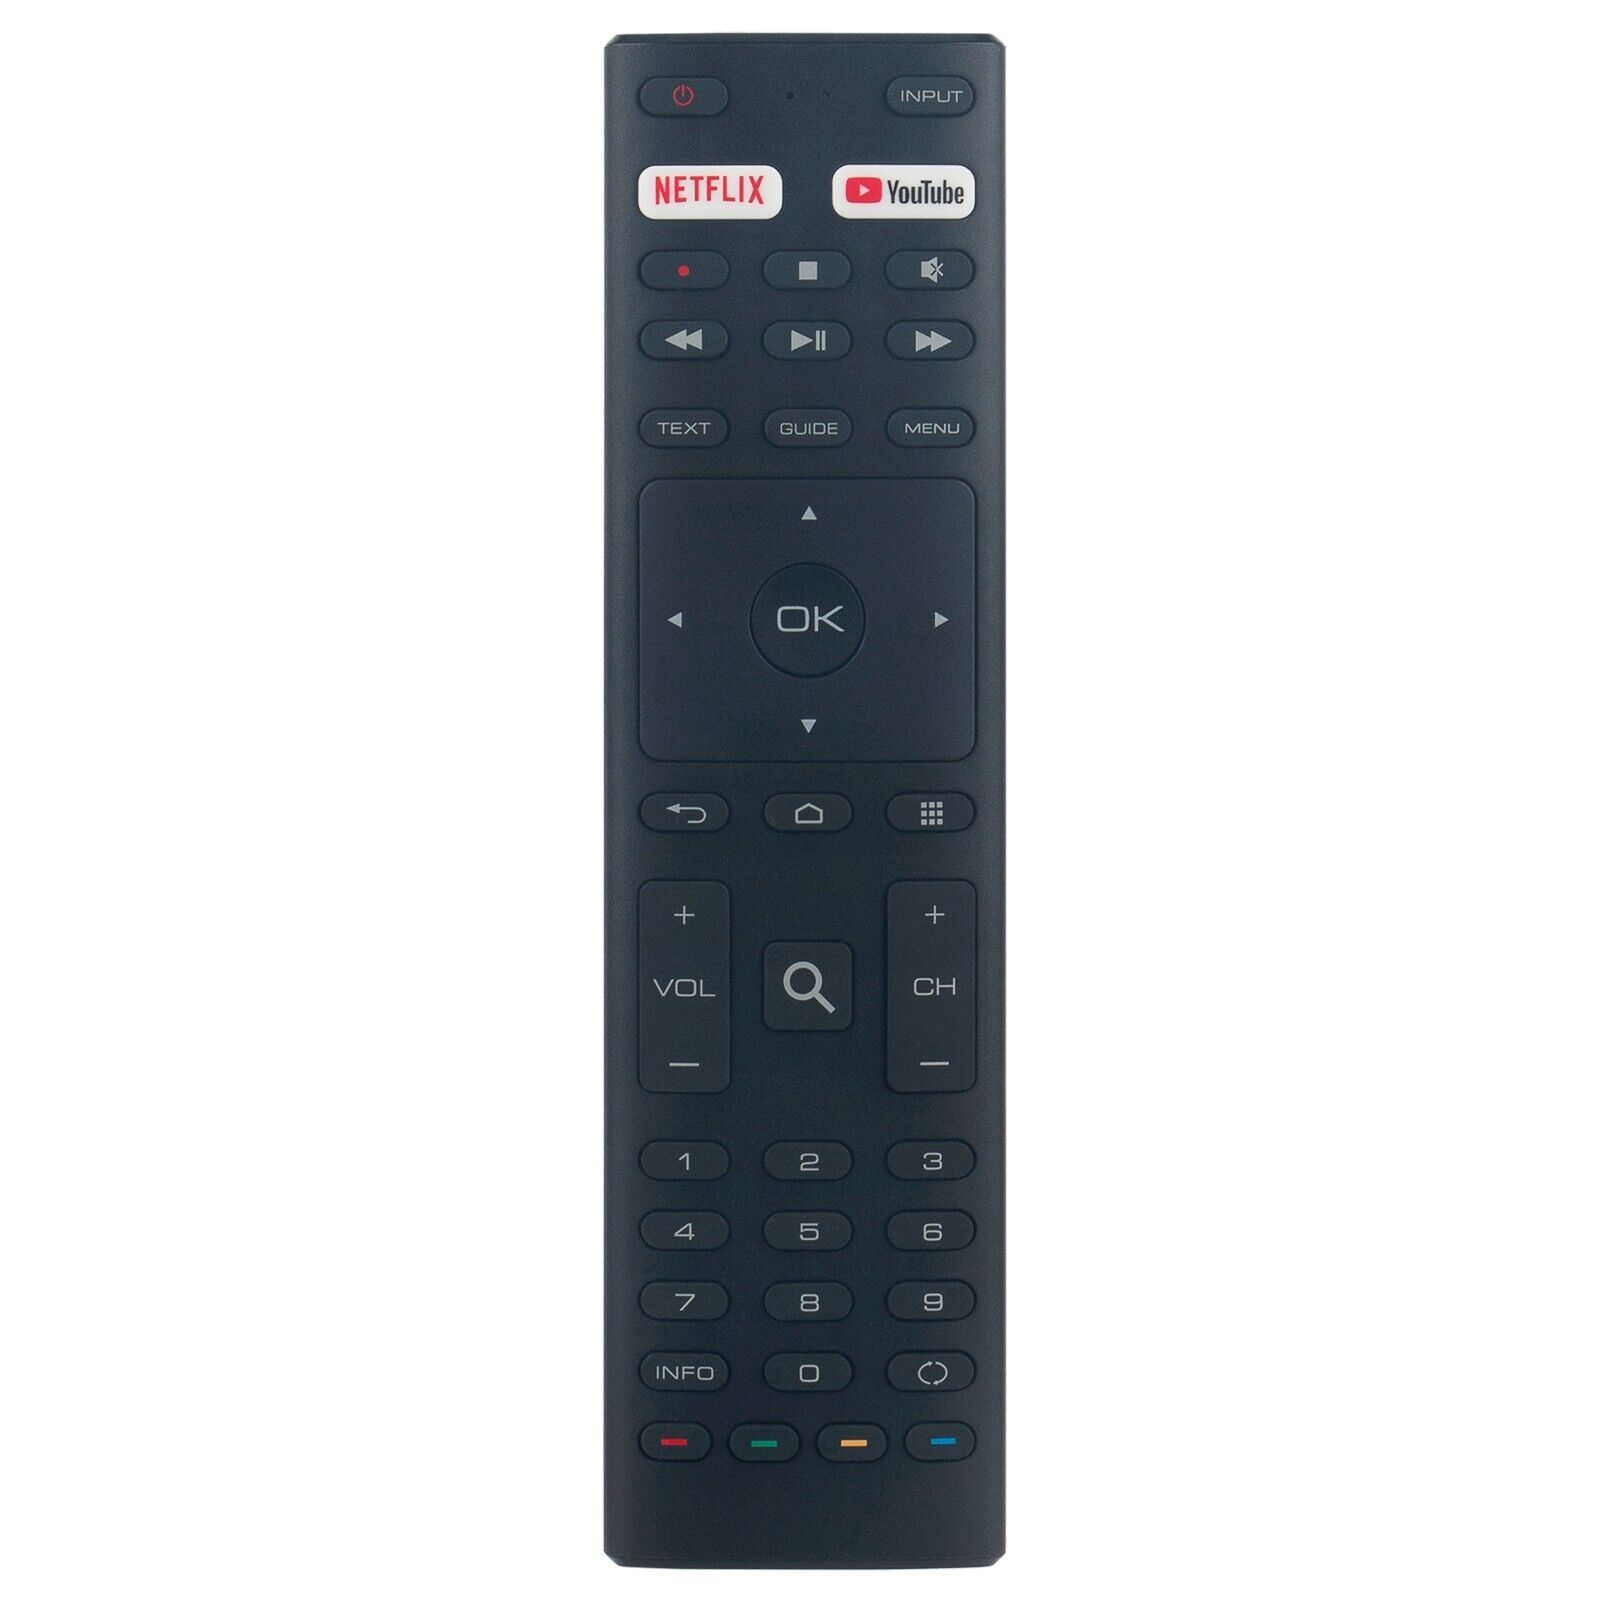 Primary image for Cle-1044 Kt1942 Replace Remote Control For Konka Tv 75U55A 55Q75A 43U55A 32H31A